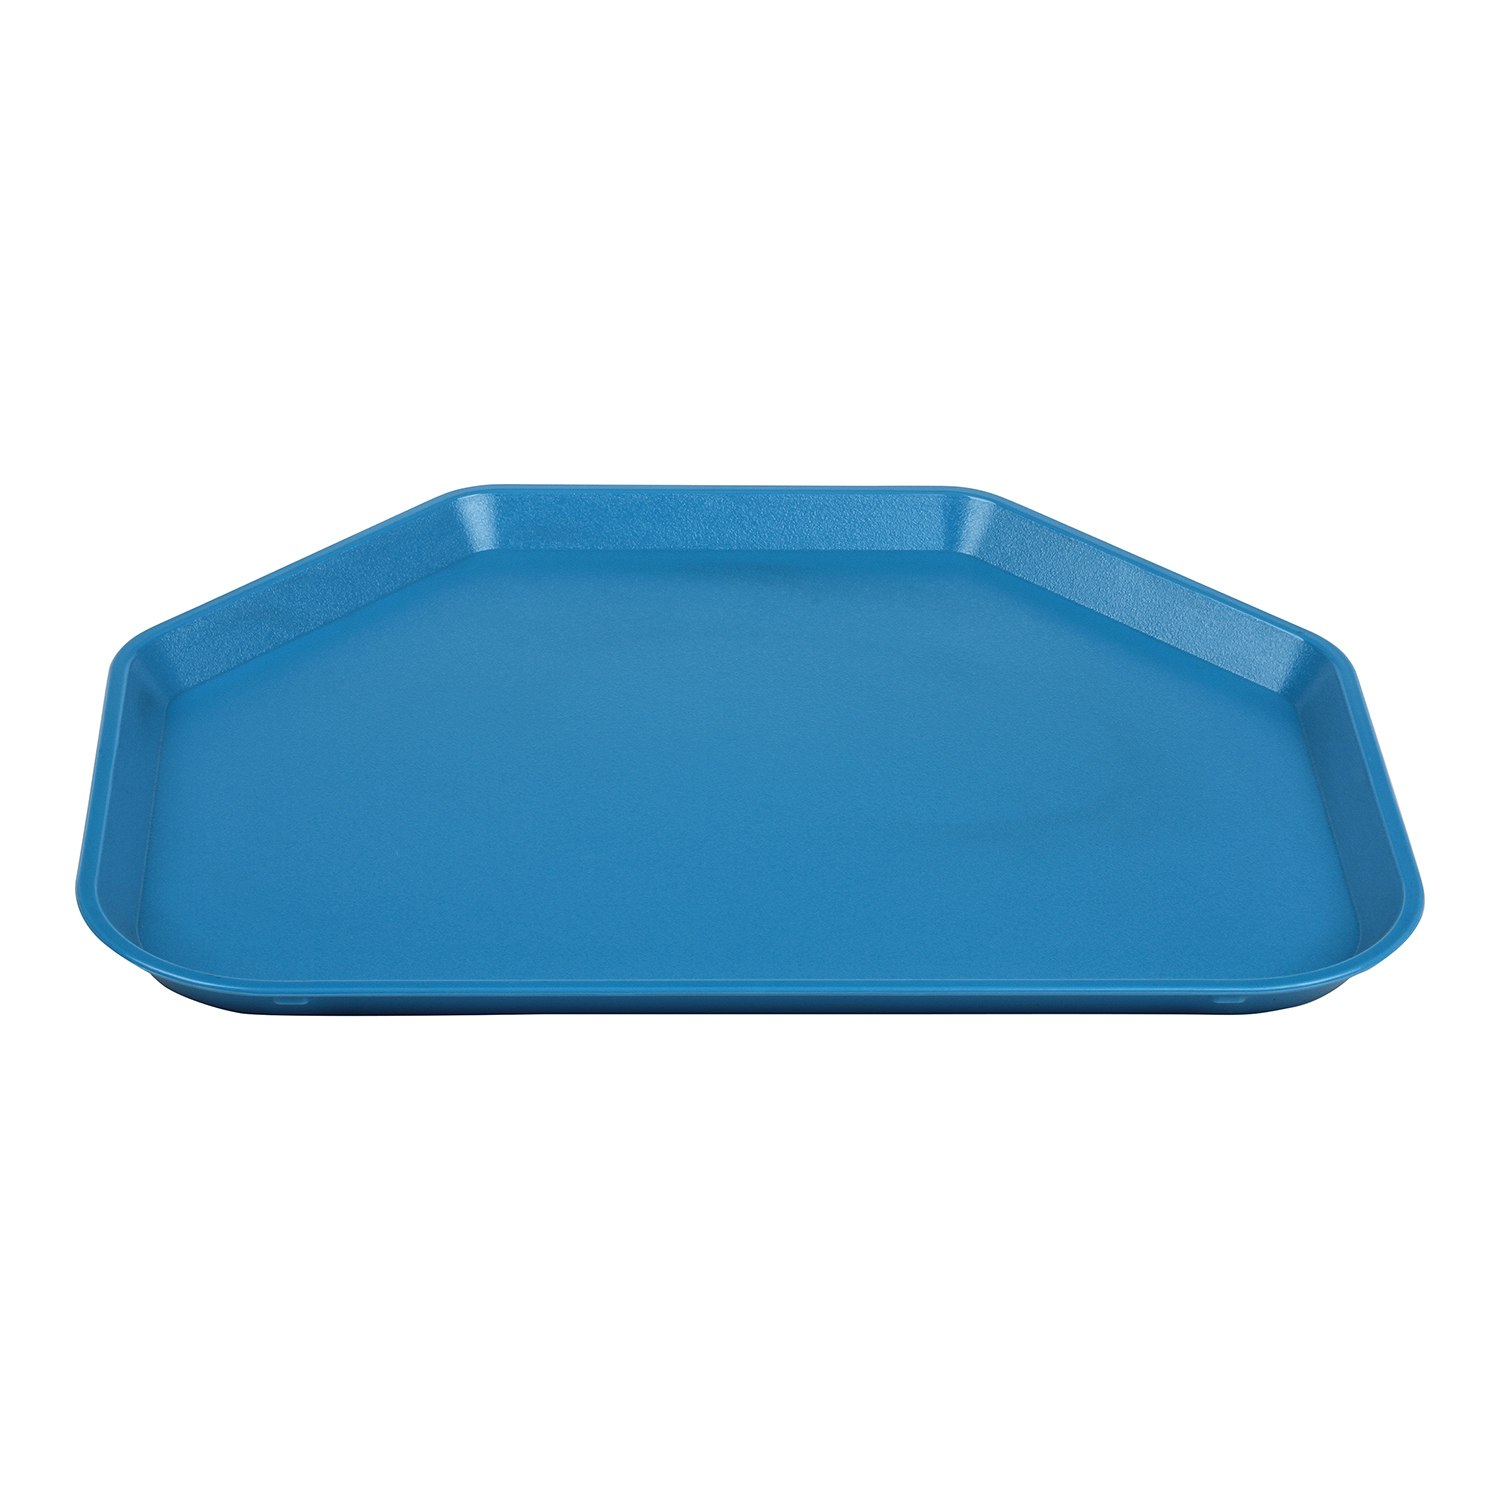 Cambro Camwear 5-Compartment Trays, 15W, Blue, Pack of 24 Trays